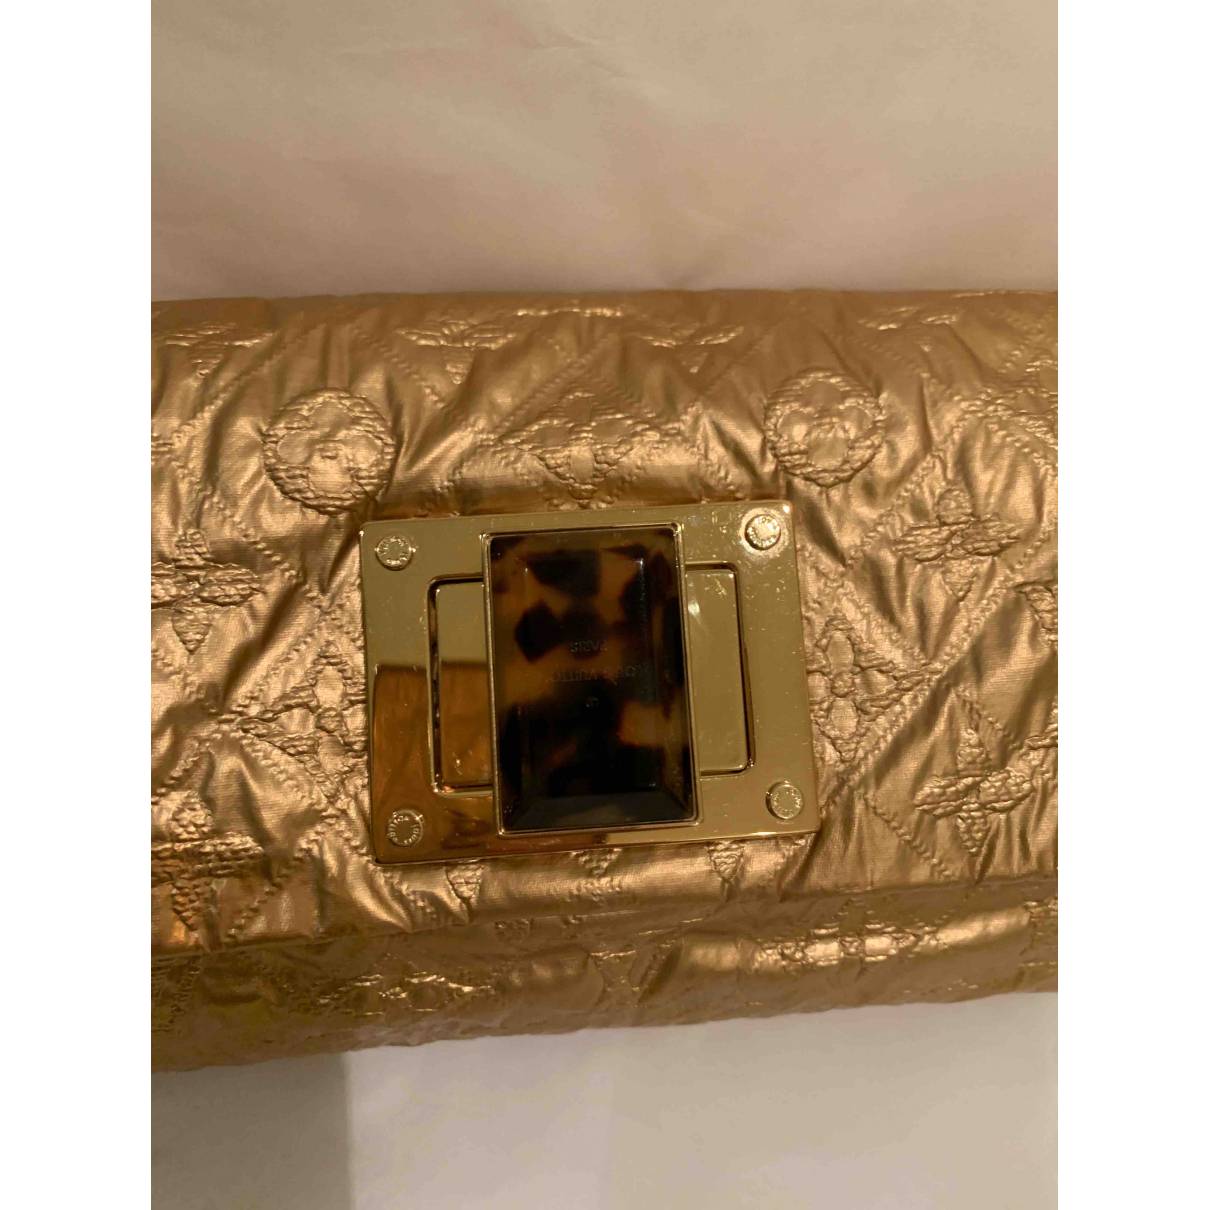 Louis Vuitton Limited Edition Altair Pochette Clutch in Monogram Jacquard  Quilted Metallic Gold Limelight - SOLD